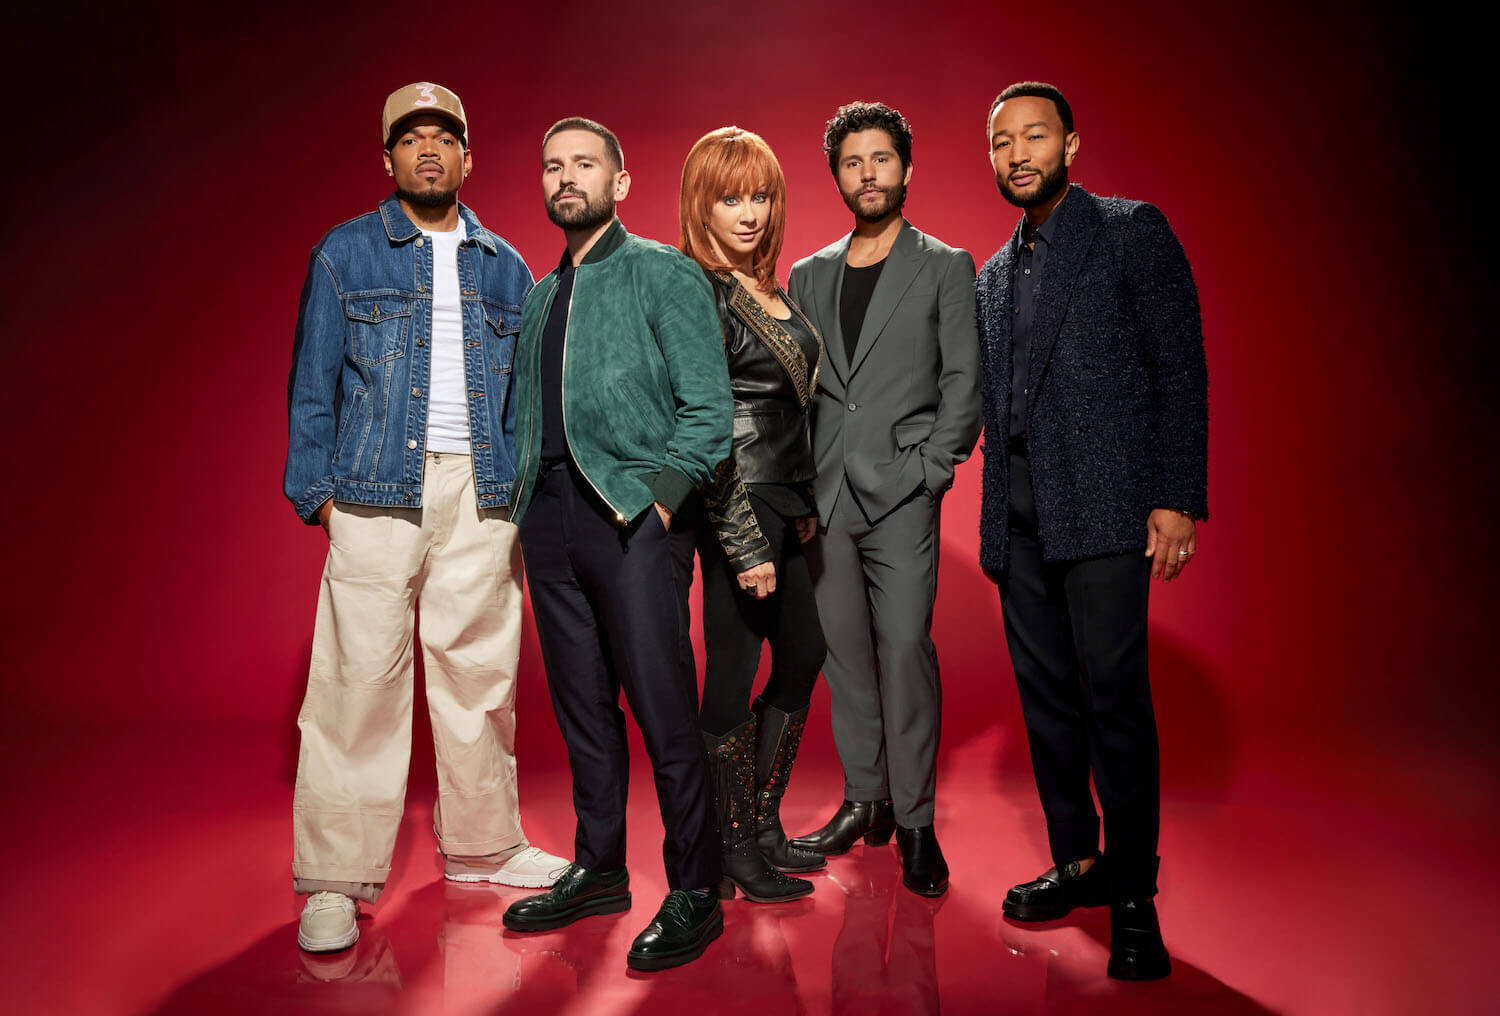 'The Voice' Season 25 coaches Chance the Rapper, Shay Mooney, Reba McEntire, Dan Smyers, and John Legend standing together against a red background